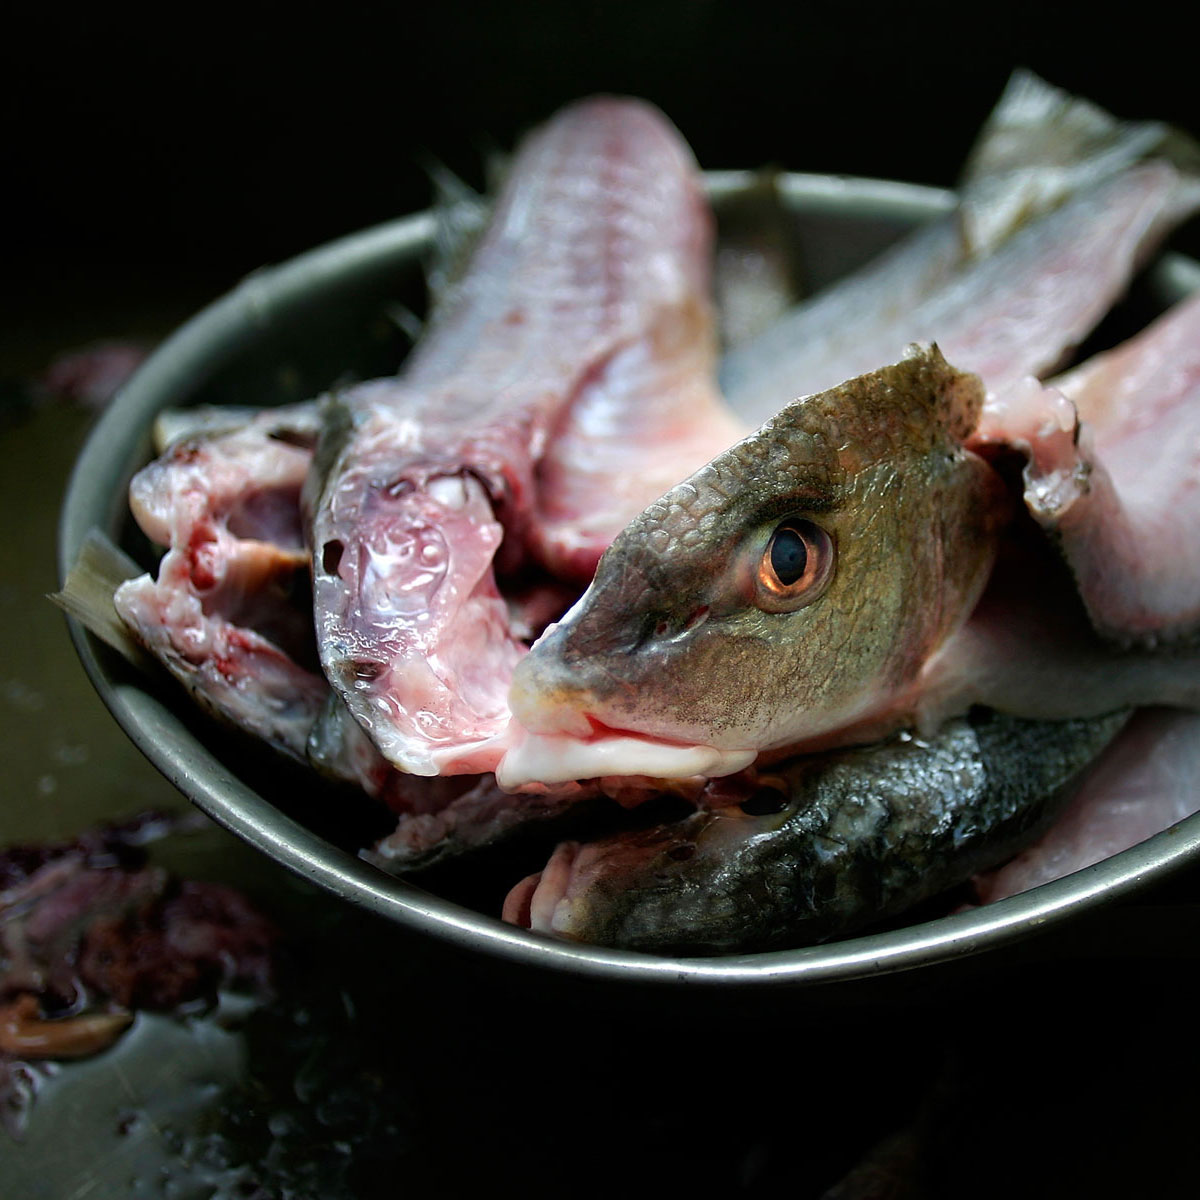 A bowl full of gutted fish, one of whose eyes glares at the camera